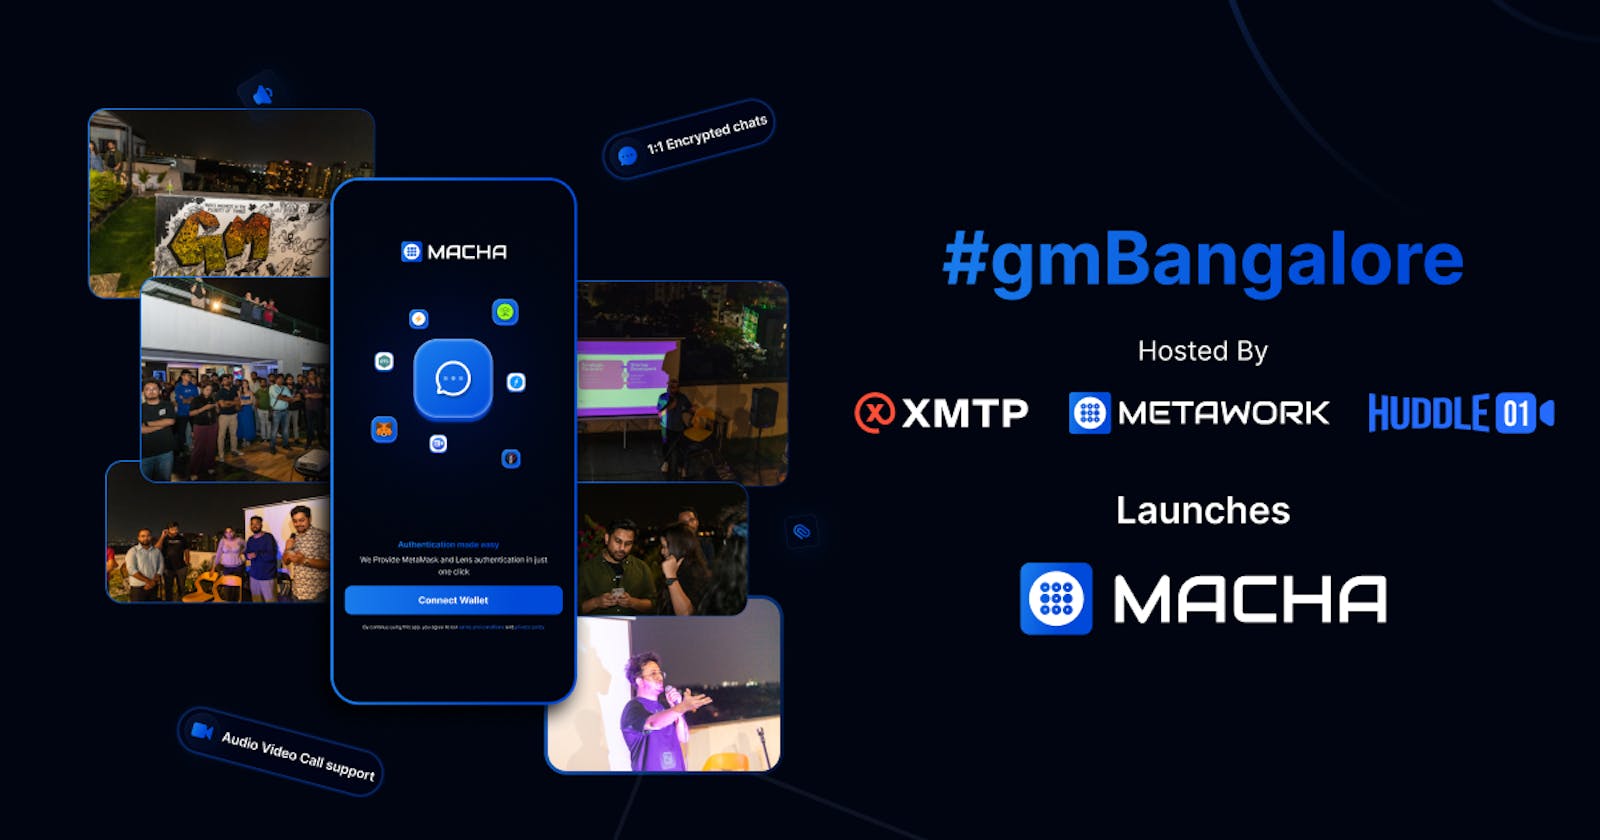 Web3 community meet at GM- Bangalore hosted by XMTP, Huddle01, and MetaWork Labs and launch of Macha - A decentralized search and messenger